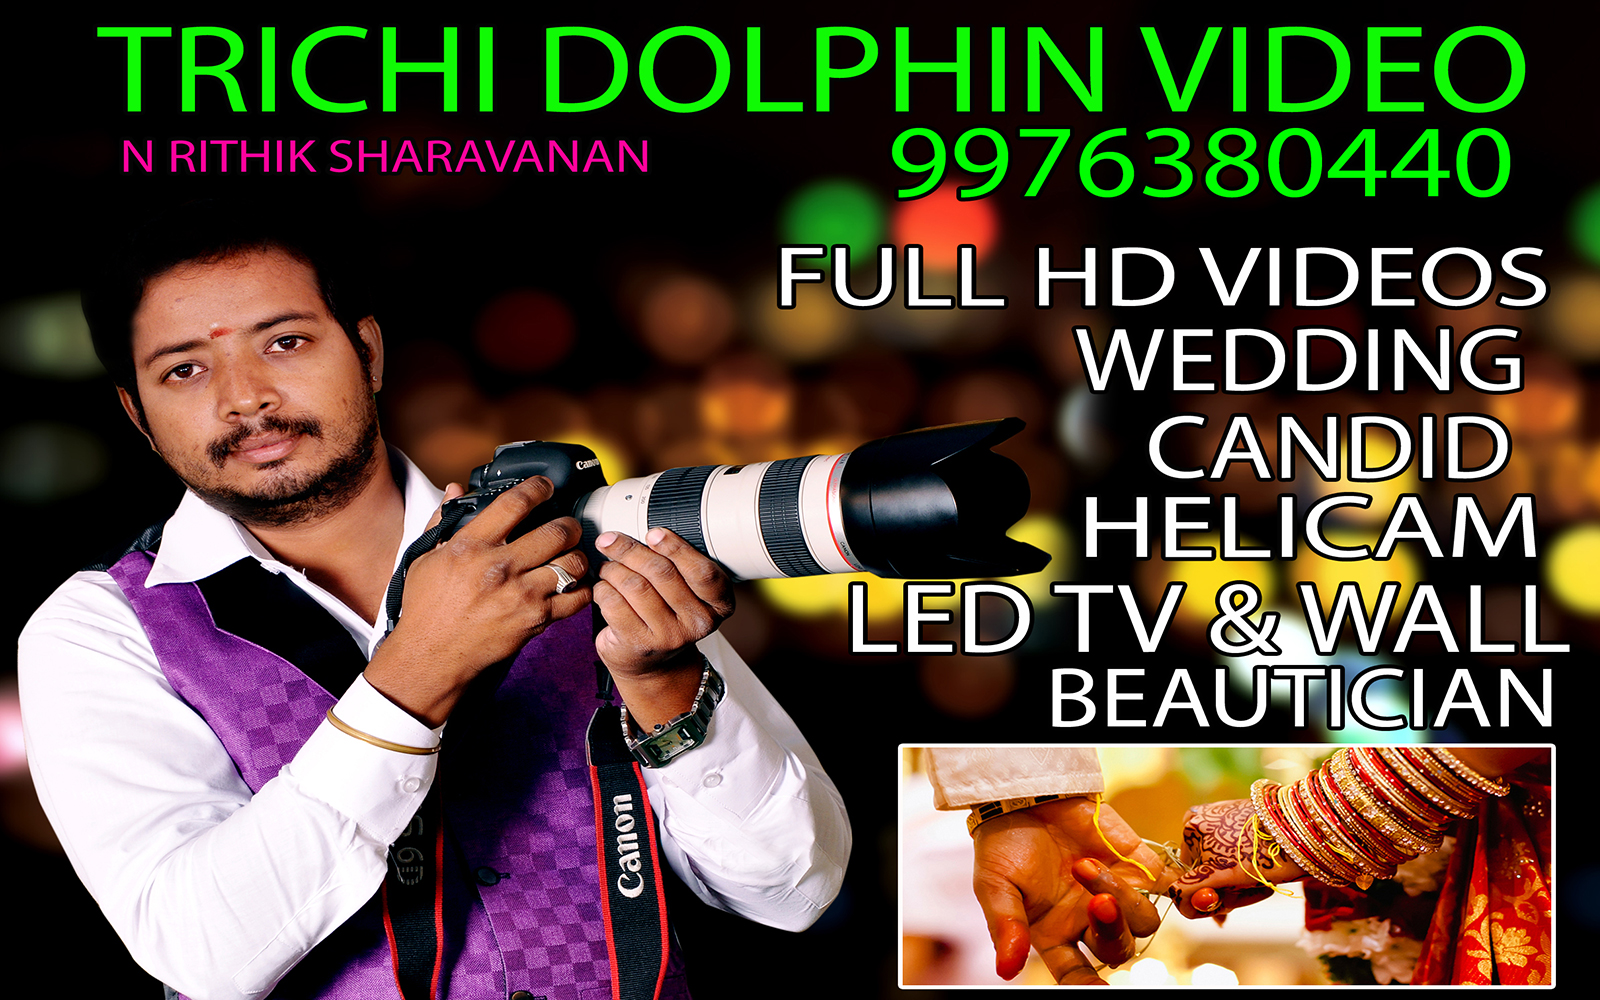 Trichy Dolphin Video|Photographer|Event Services